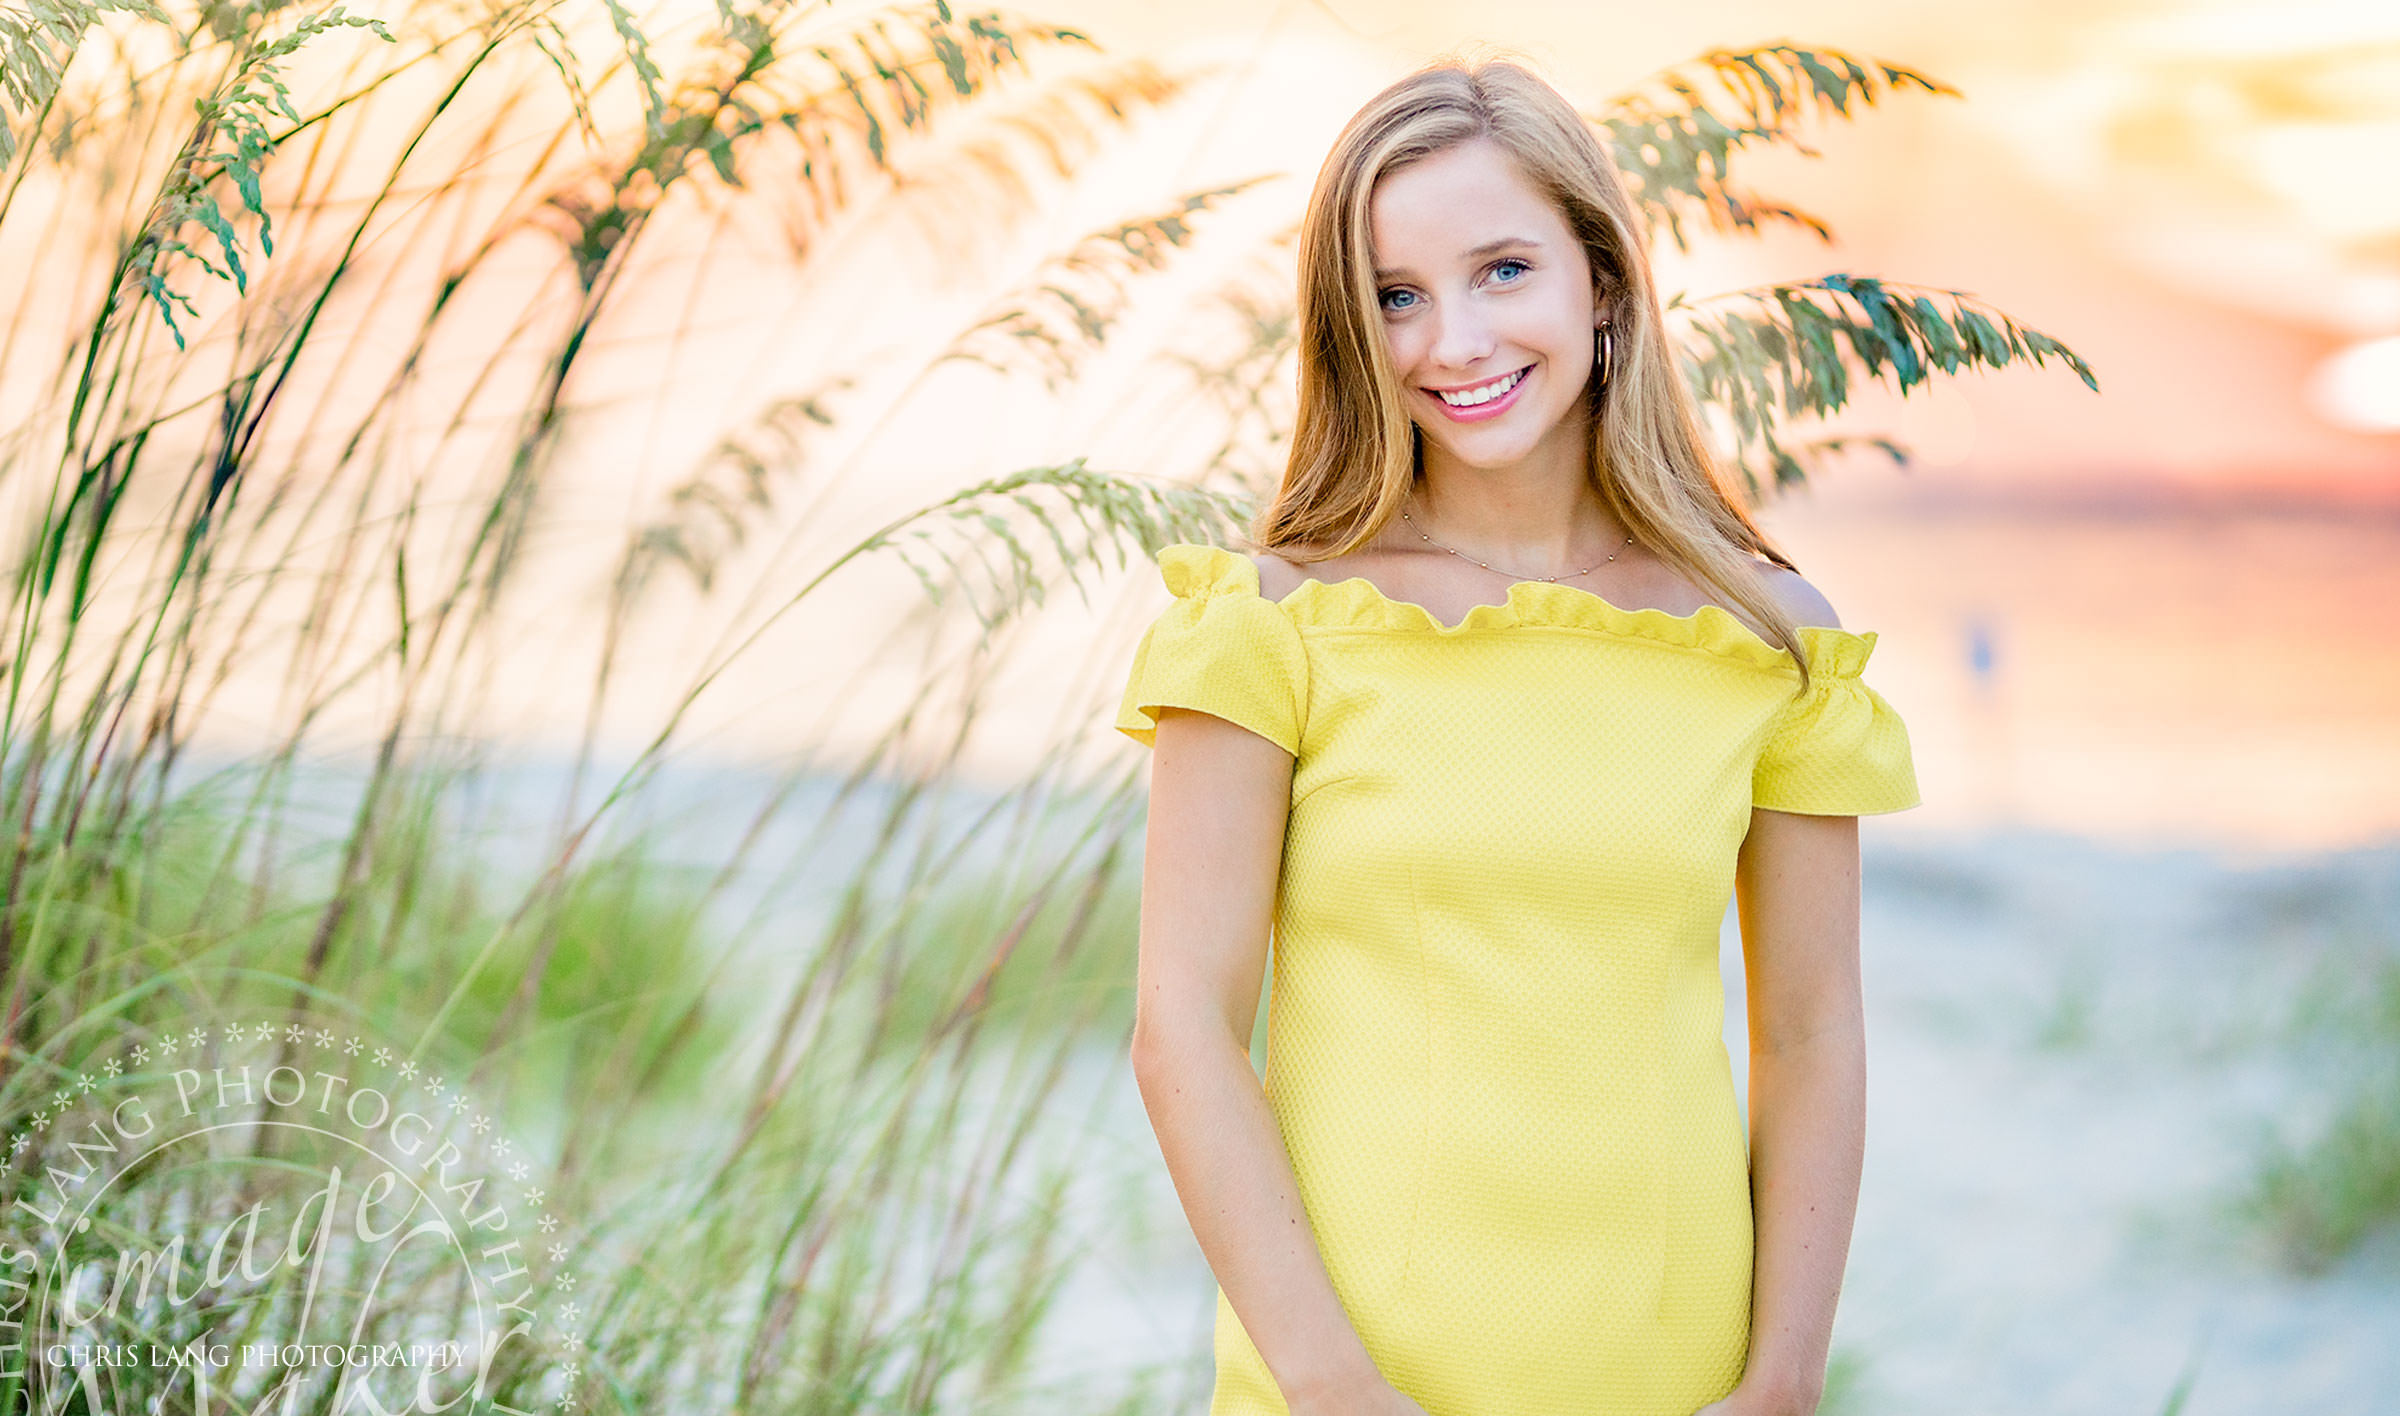 Bald Head Island Photographers - BHI Family Photography - Family Photos  - family portrait   family pictures  - BHI Photographer  - Bald Head Island pictures - Chris Lang Photography  - image of gil on the beach in a yellow dress - beach protraits